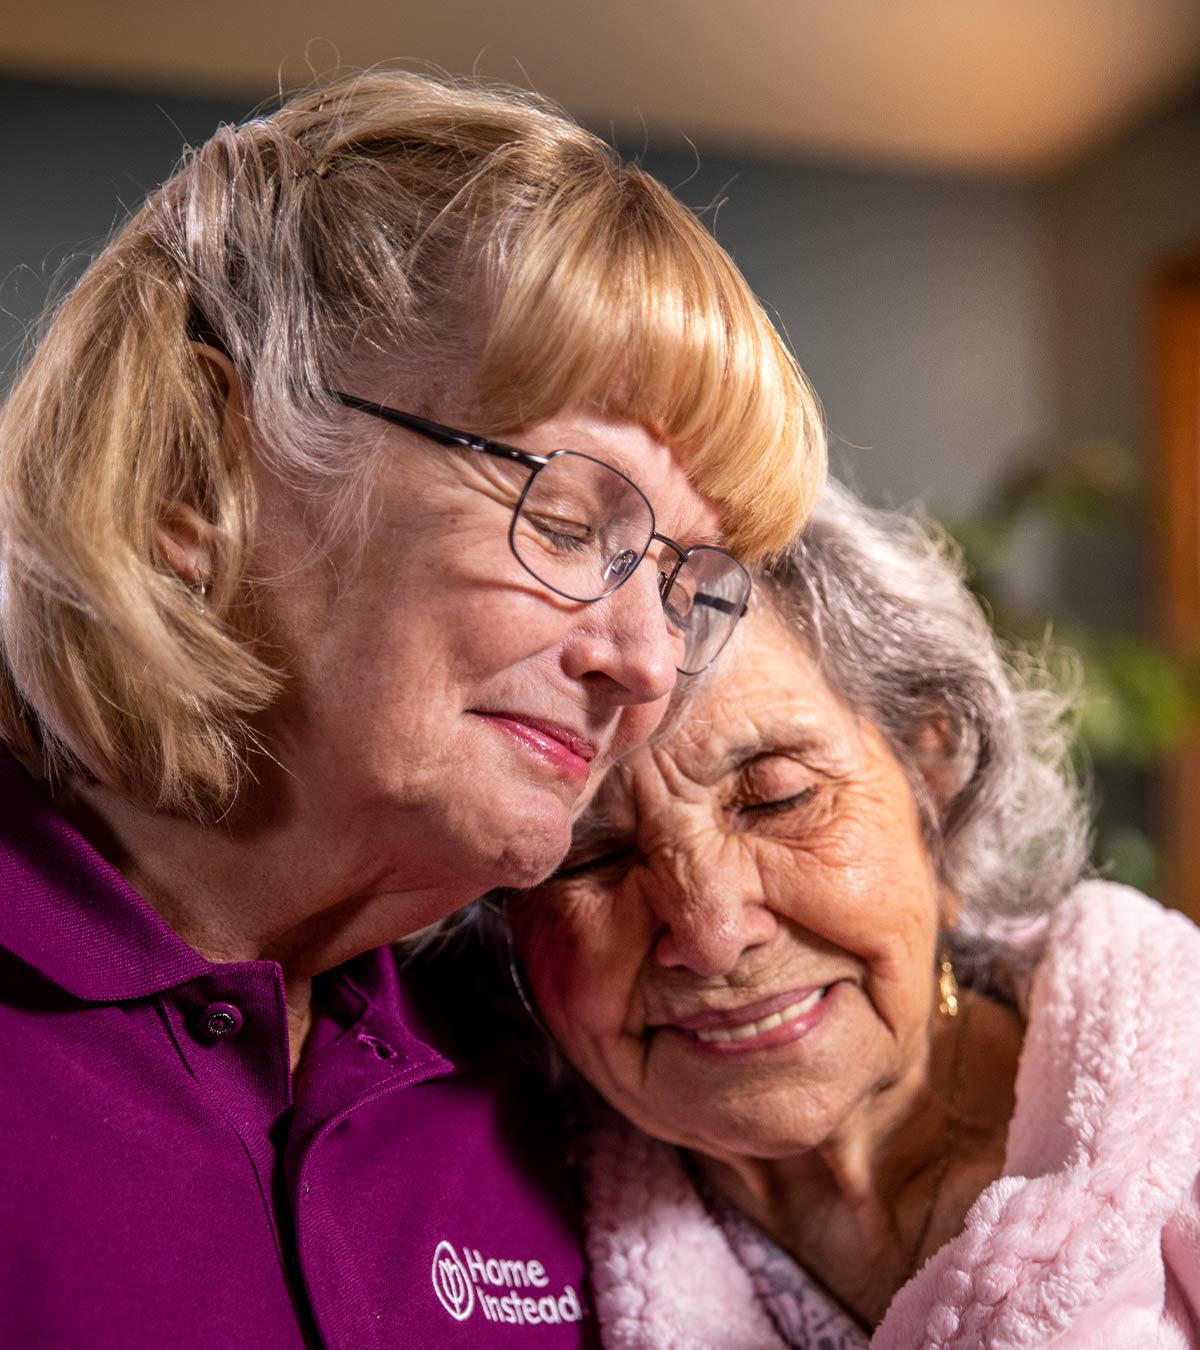 CAREGiver providing in-home senior care services. Home Instead of Guilford, CT provides Elder Care to aging adults. 